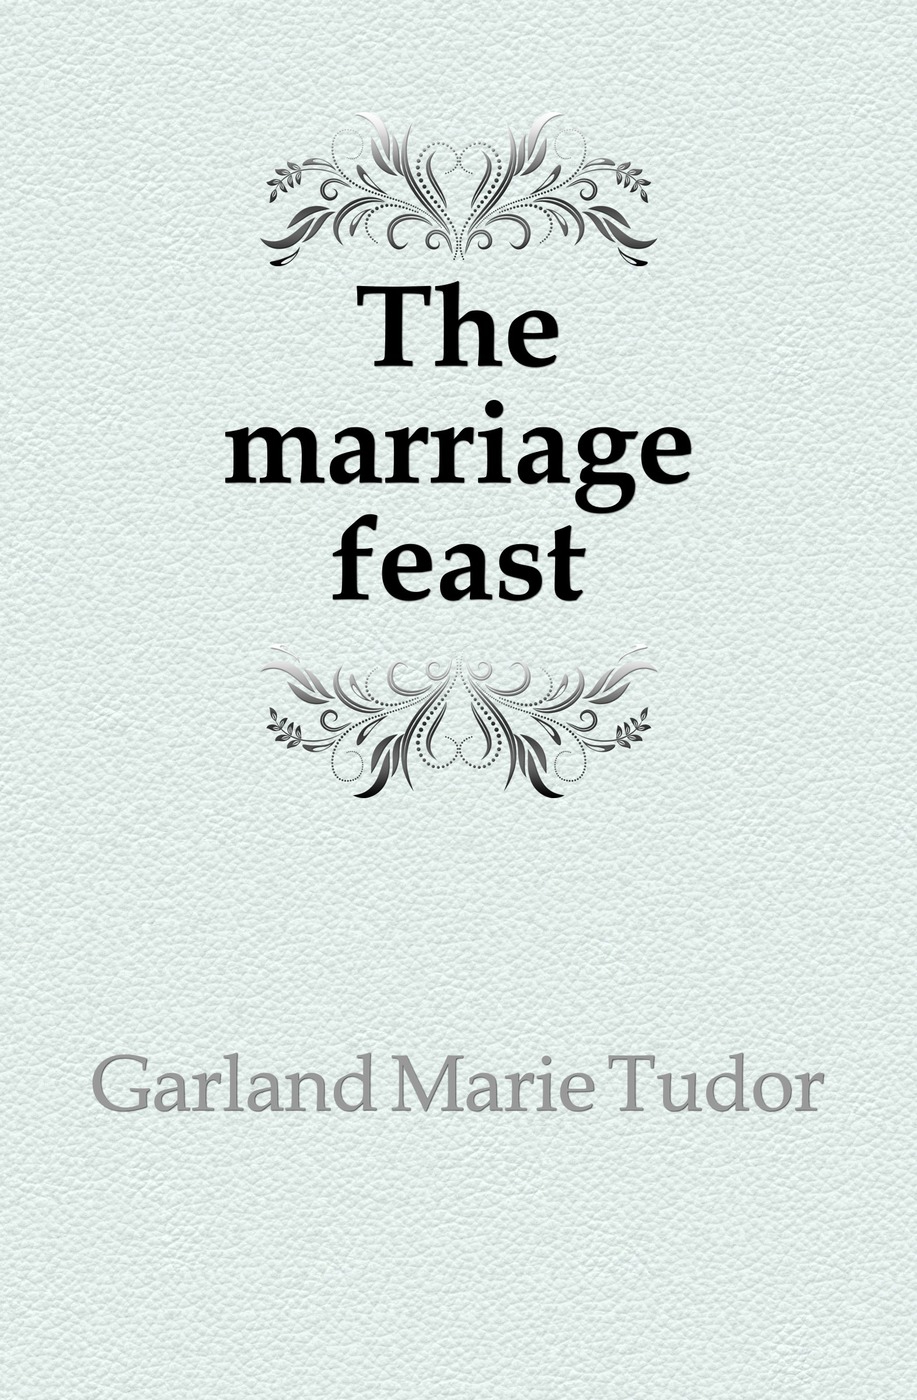 The marriage feast